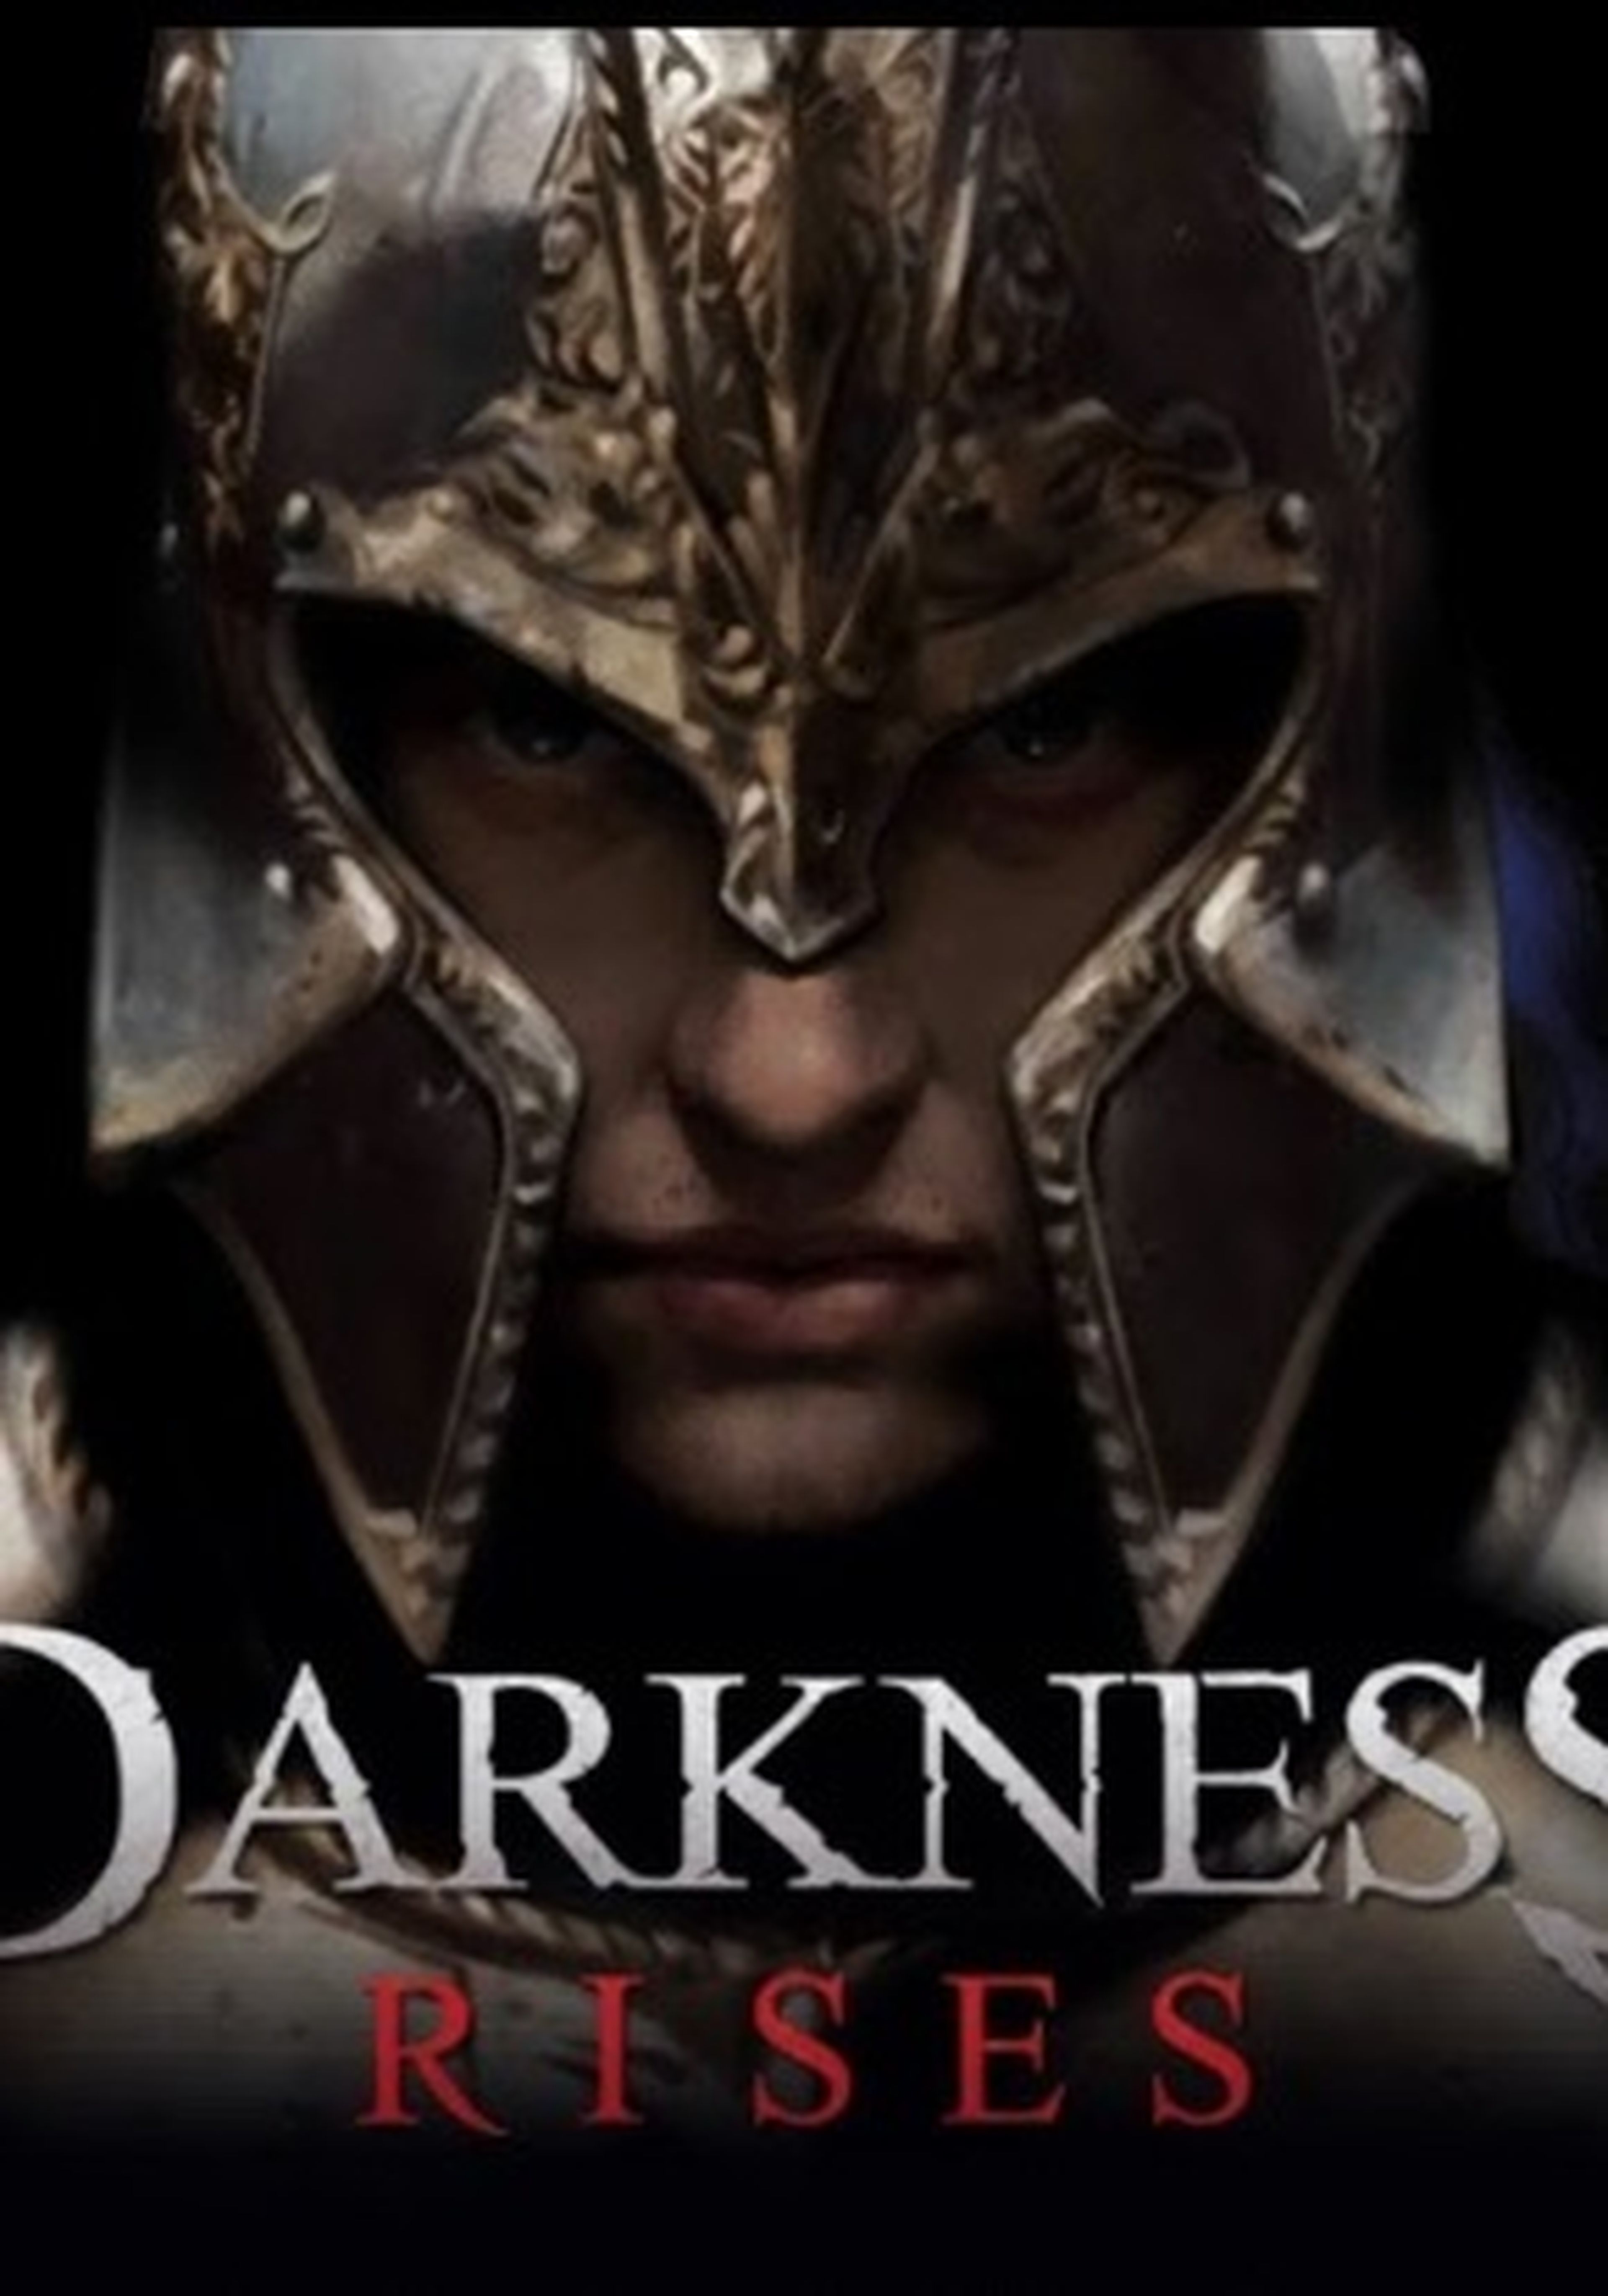 Darkness rises cover